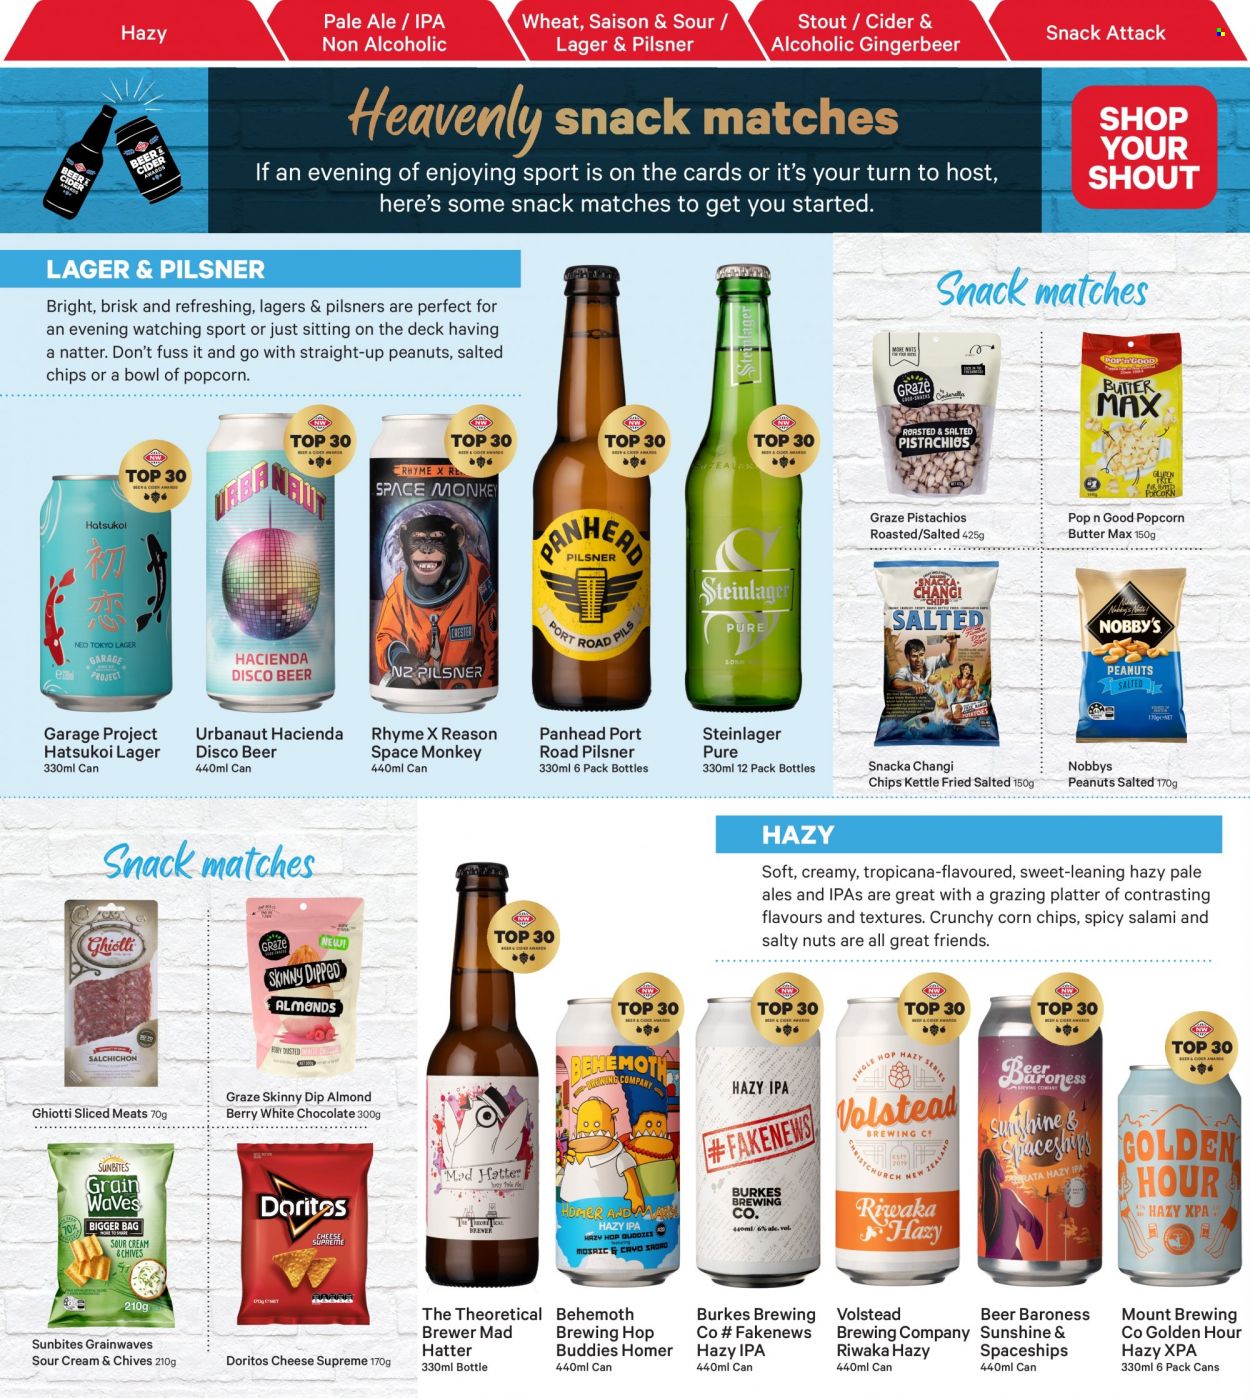 thumbnail - New World mailer - 15.05.2022 - 12.06.2022 - Sales products - chives, salami, cheese, butter, Sunshine, dip, white chocolate, chocolate, snack, Doritos, chips, corn chips, popcorn, Sunbites, brewer, peanuts, pistachios, Graze, cider, Steinlager, Lager, IPA. Page 8.